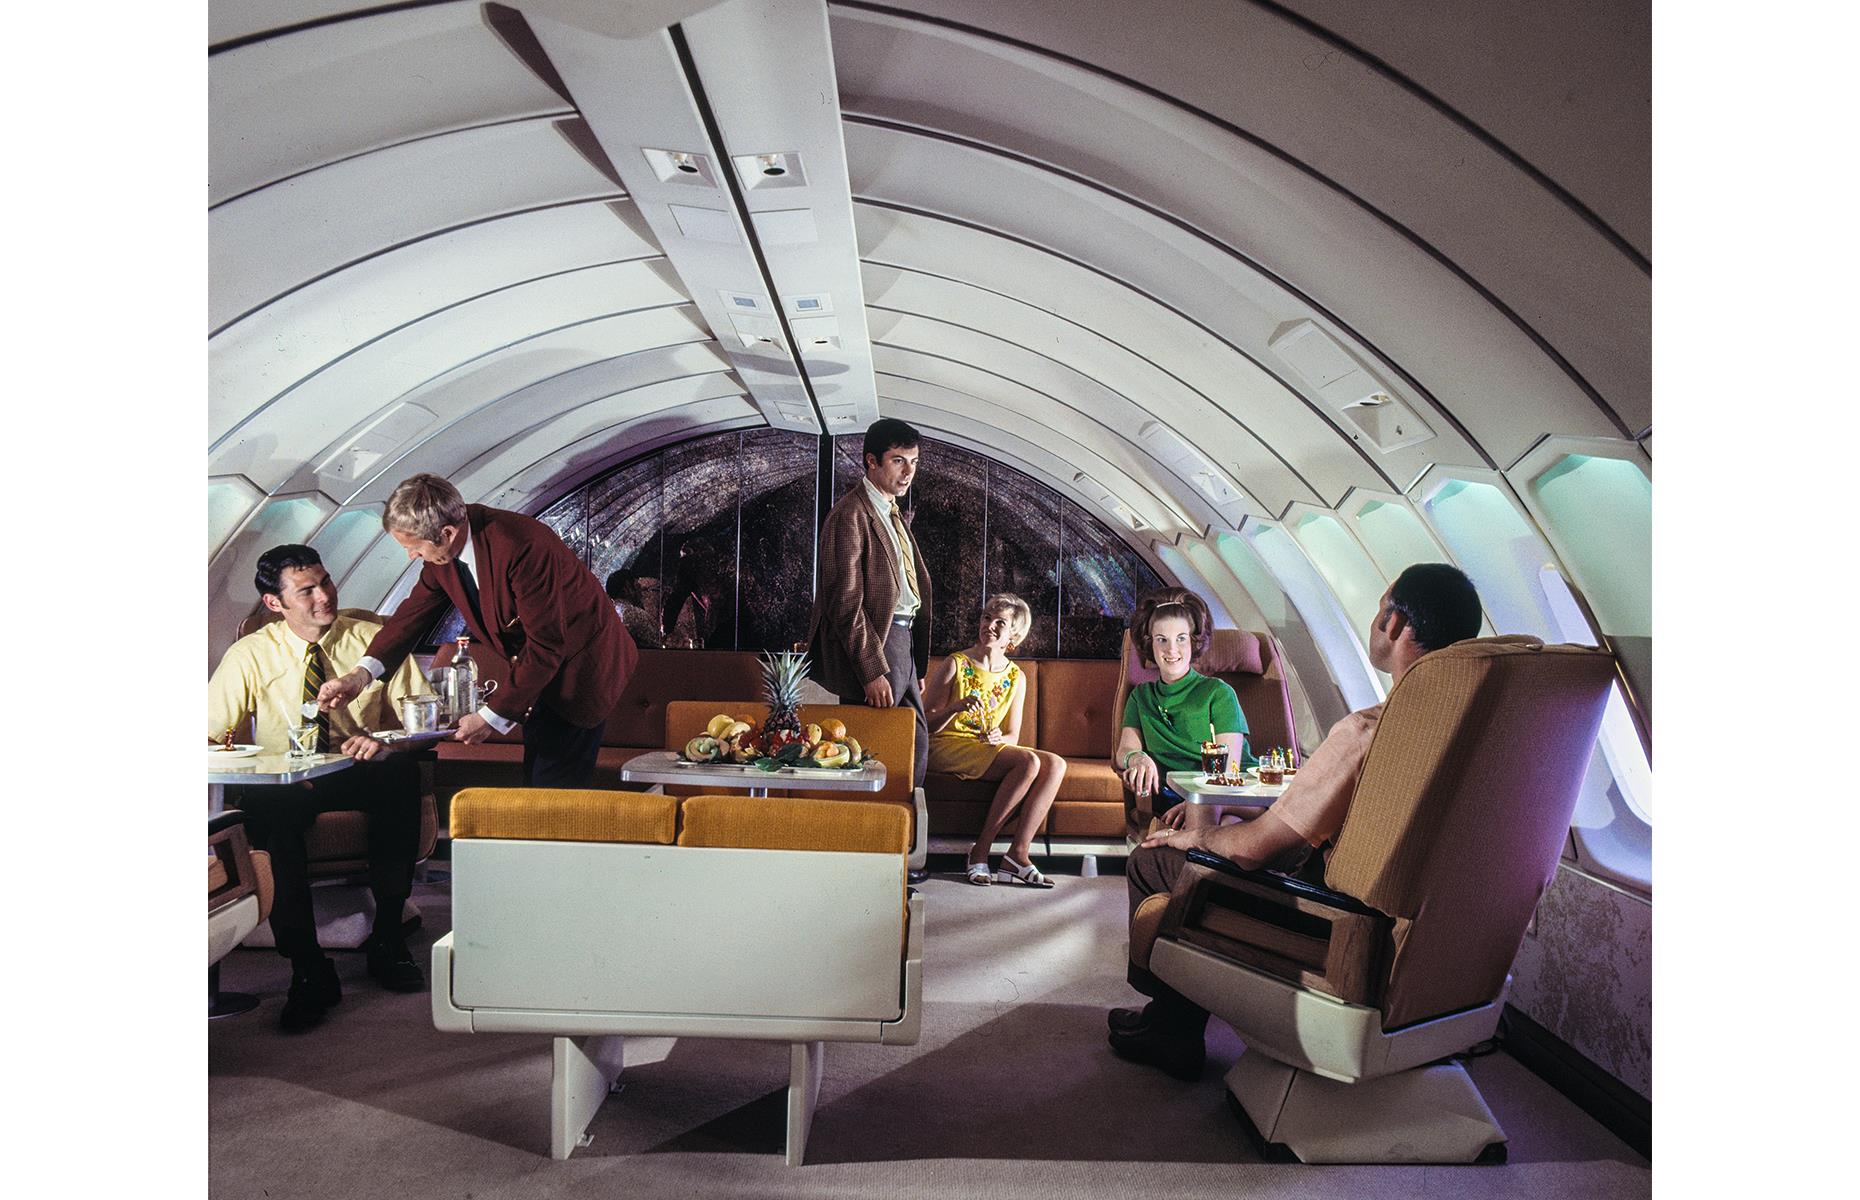 Swish onboard lounges were still commonplace for first-class guests too and most travelers would socialize with their fellow passengers over drinks. This lounge was onboard SAS's Boeing 747-B (nicknamed the "Huge Viking") in the 1970s.